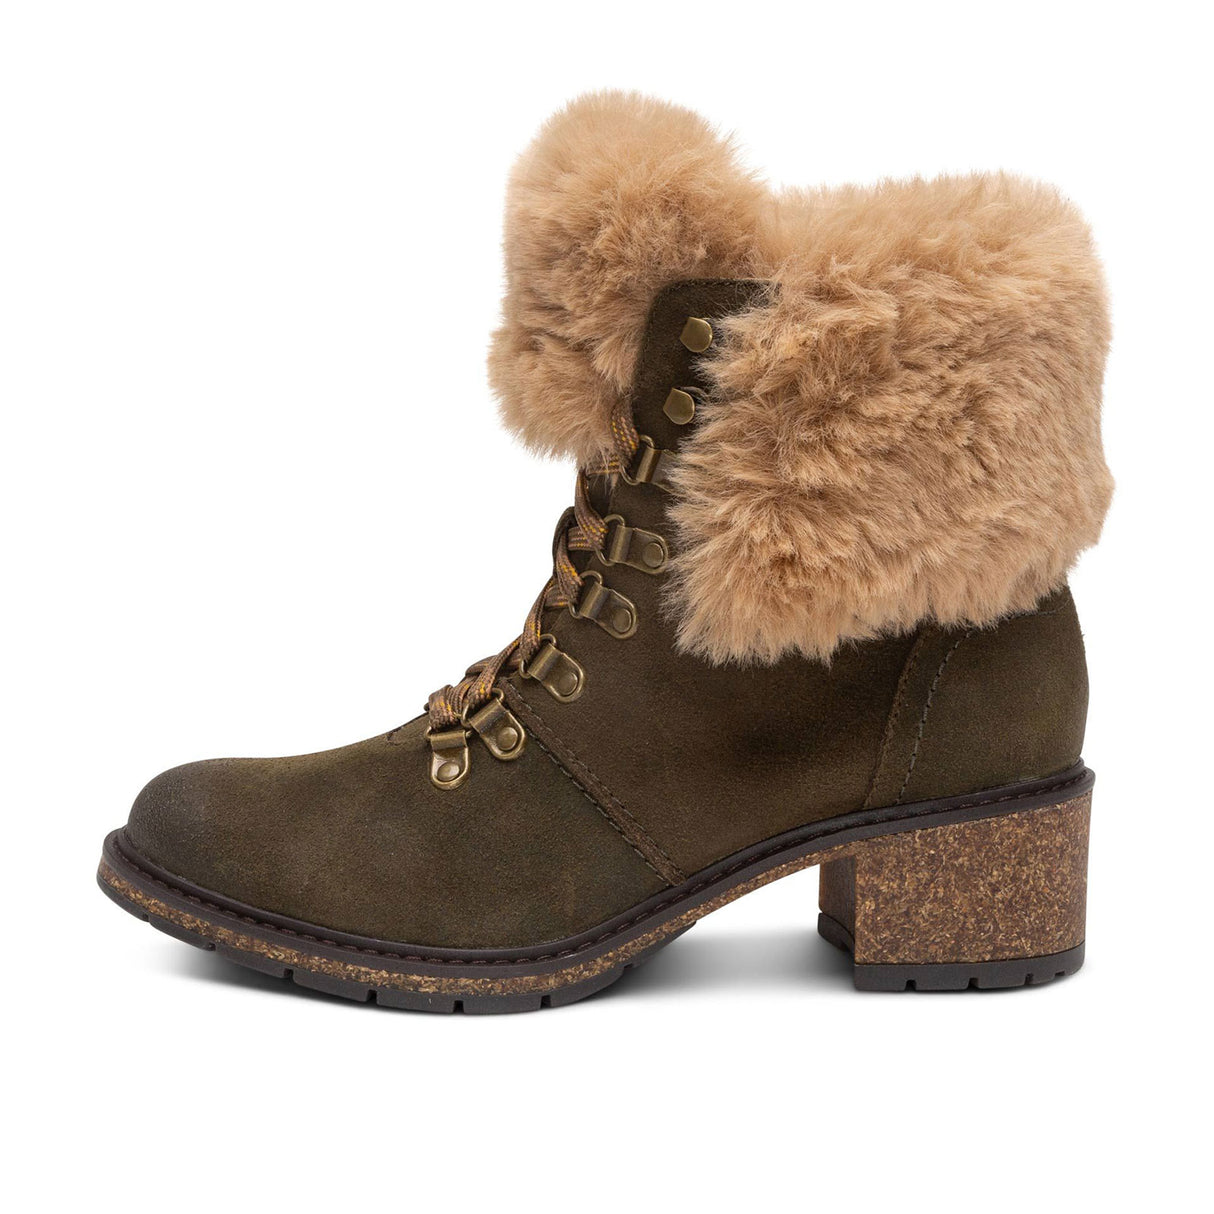 Aetrex Brooklyn Boot (Women) - Khaki Boots - Fashion - Ankle Boot - The Heel Shoe Fitters